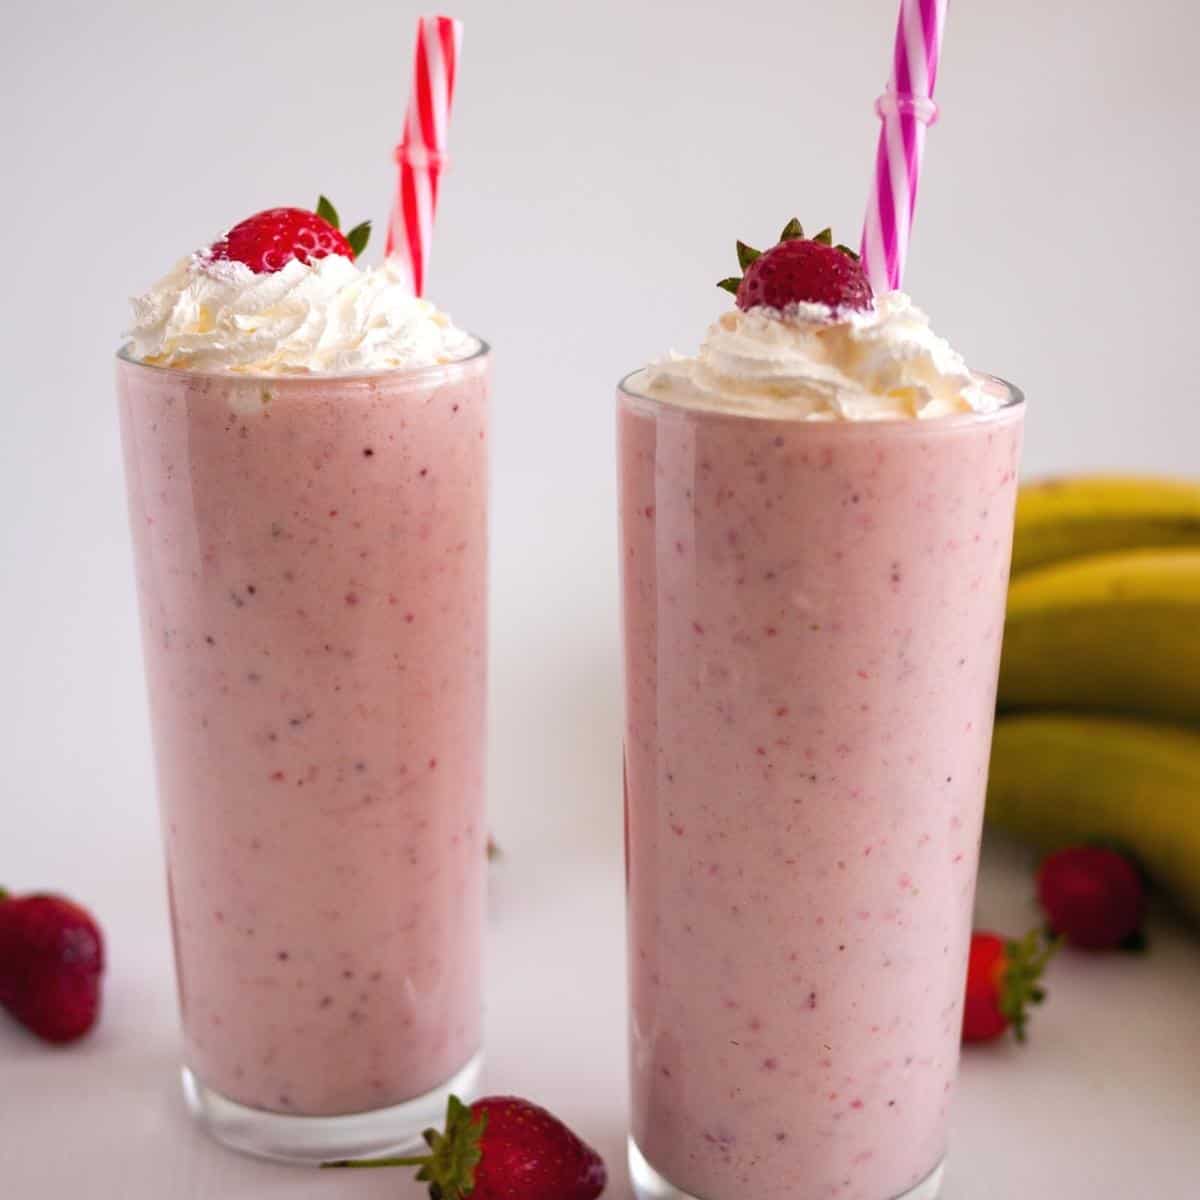 two glasses with milkshake, whipped cream, strawberry and a straw